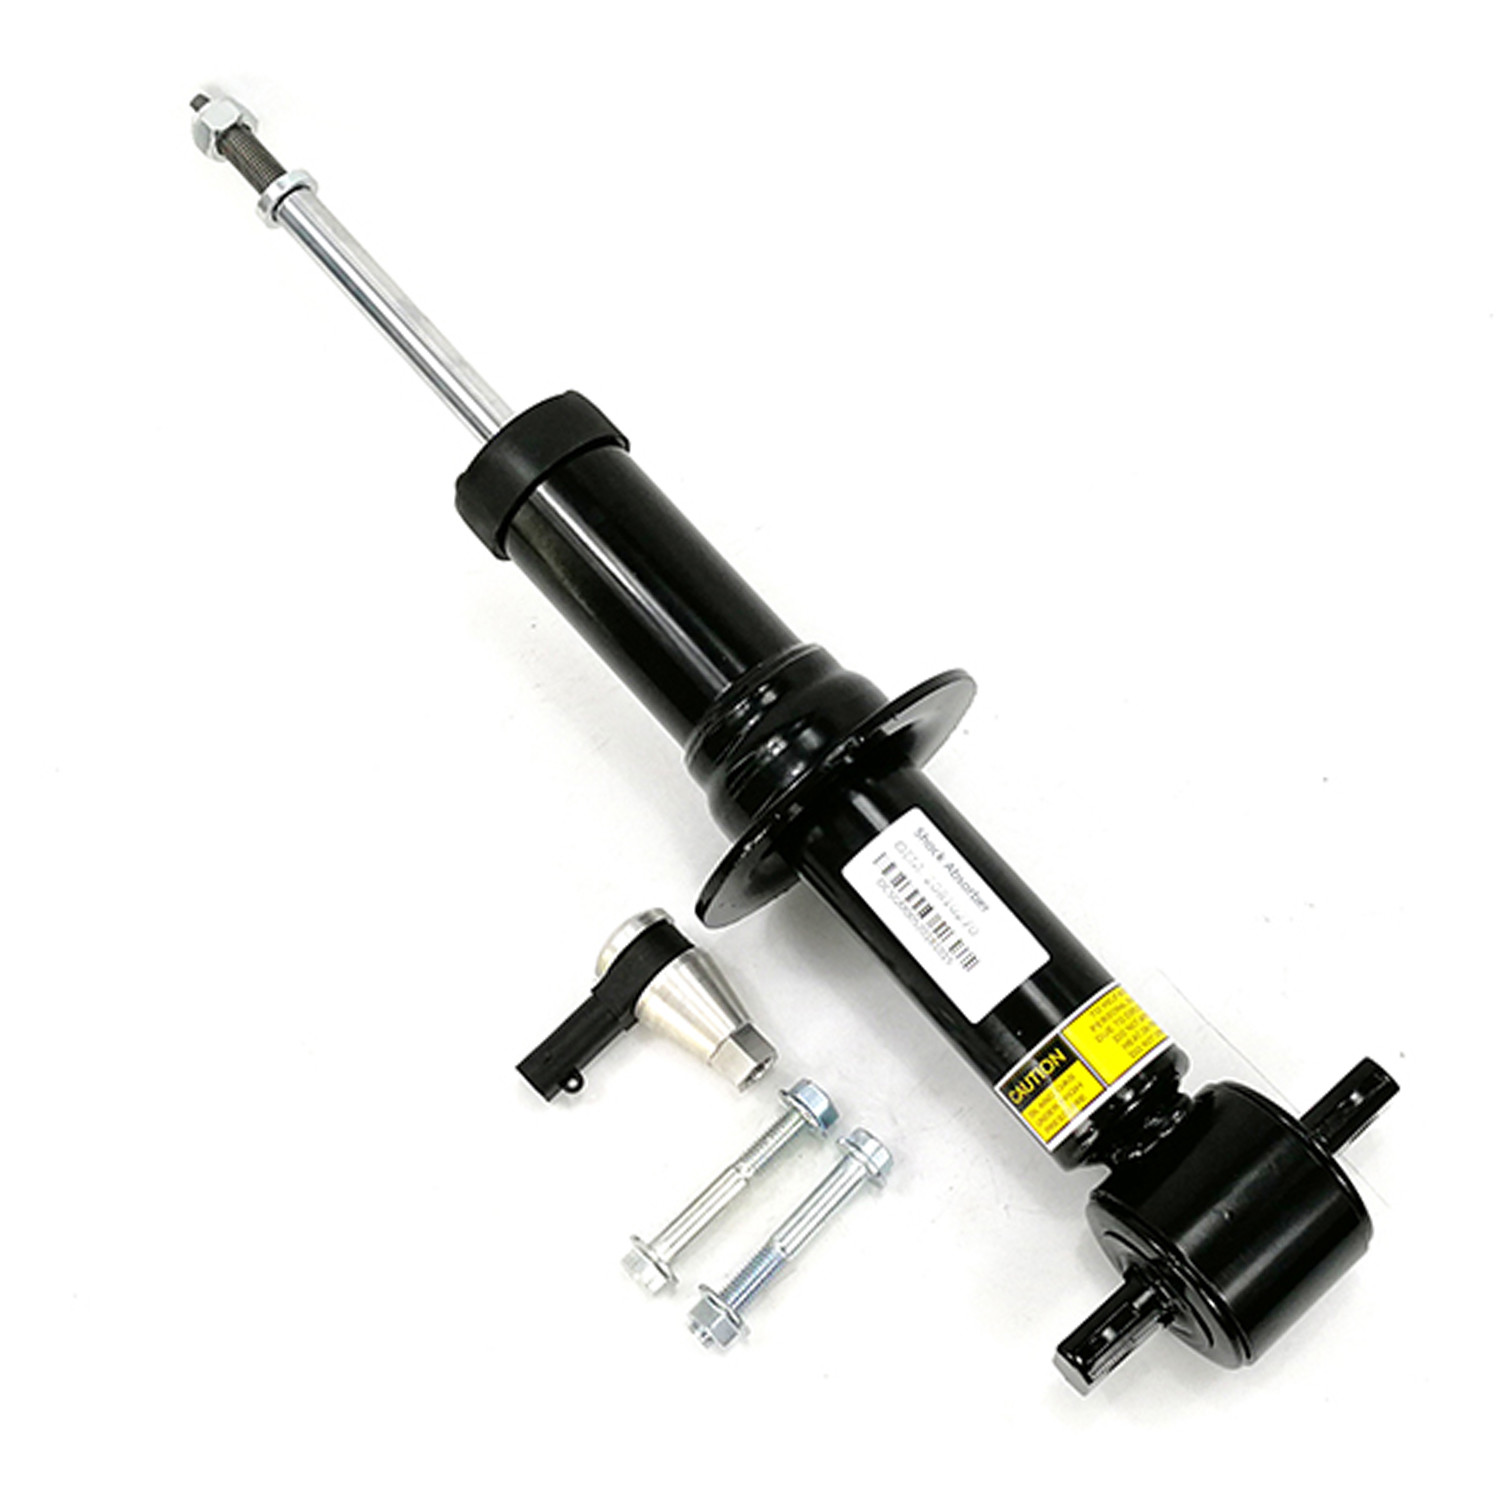 Quality 15886465 Front Shock Absorber Strut For Cadillac Escalade Chevy Avalanche Tahoe GMC for sale